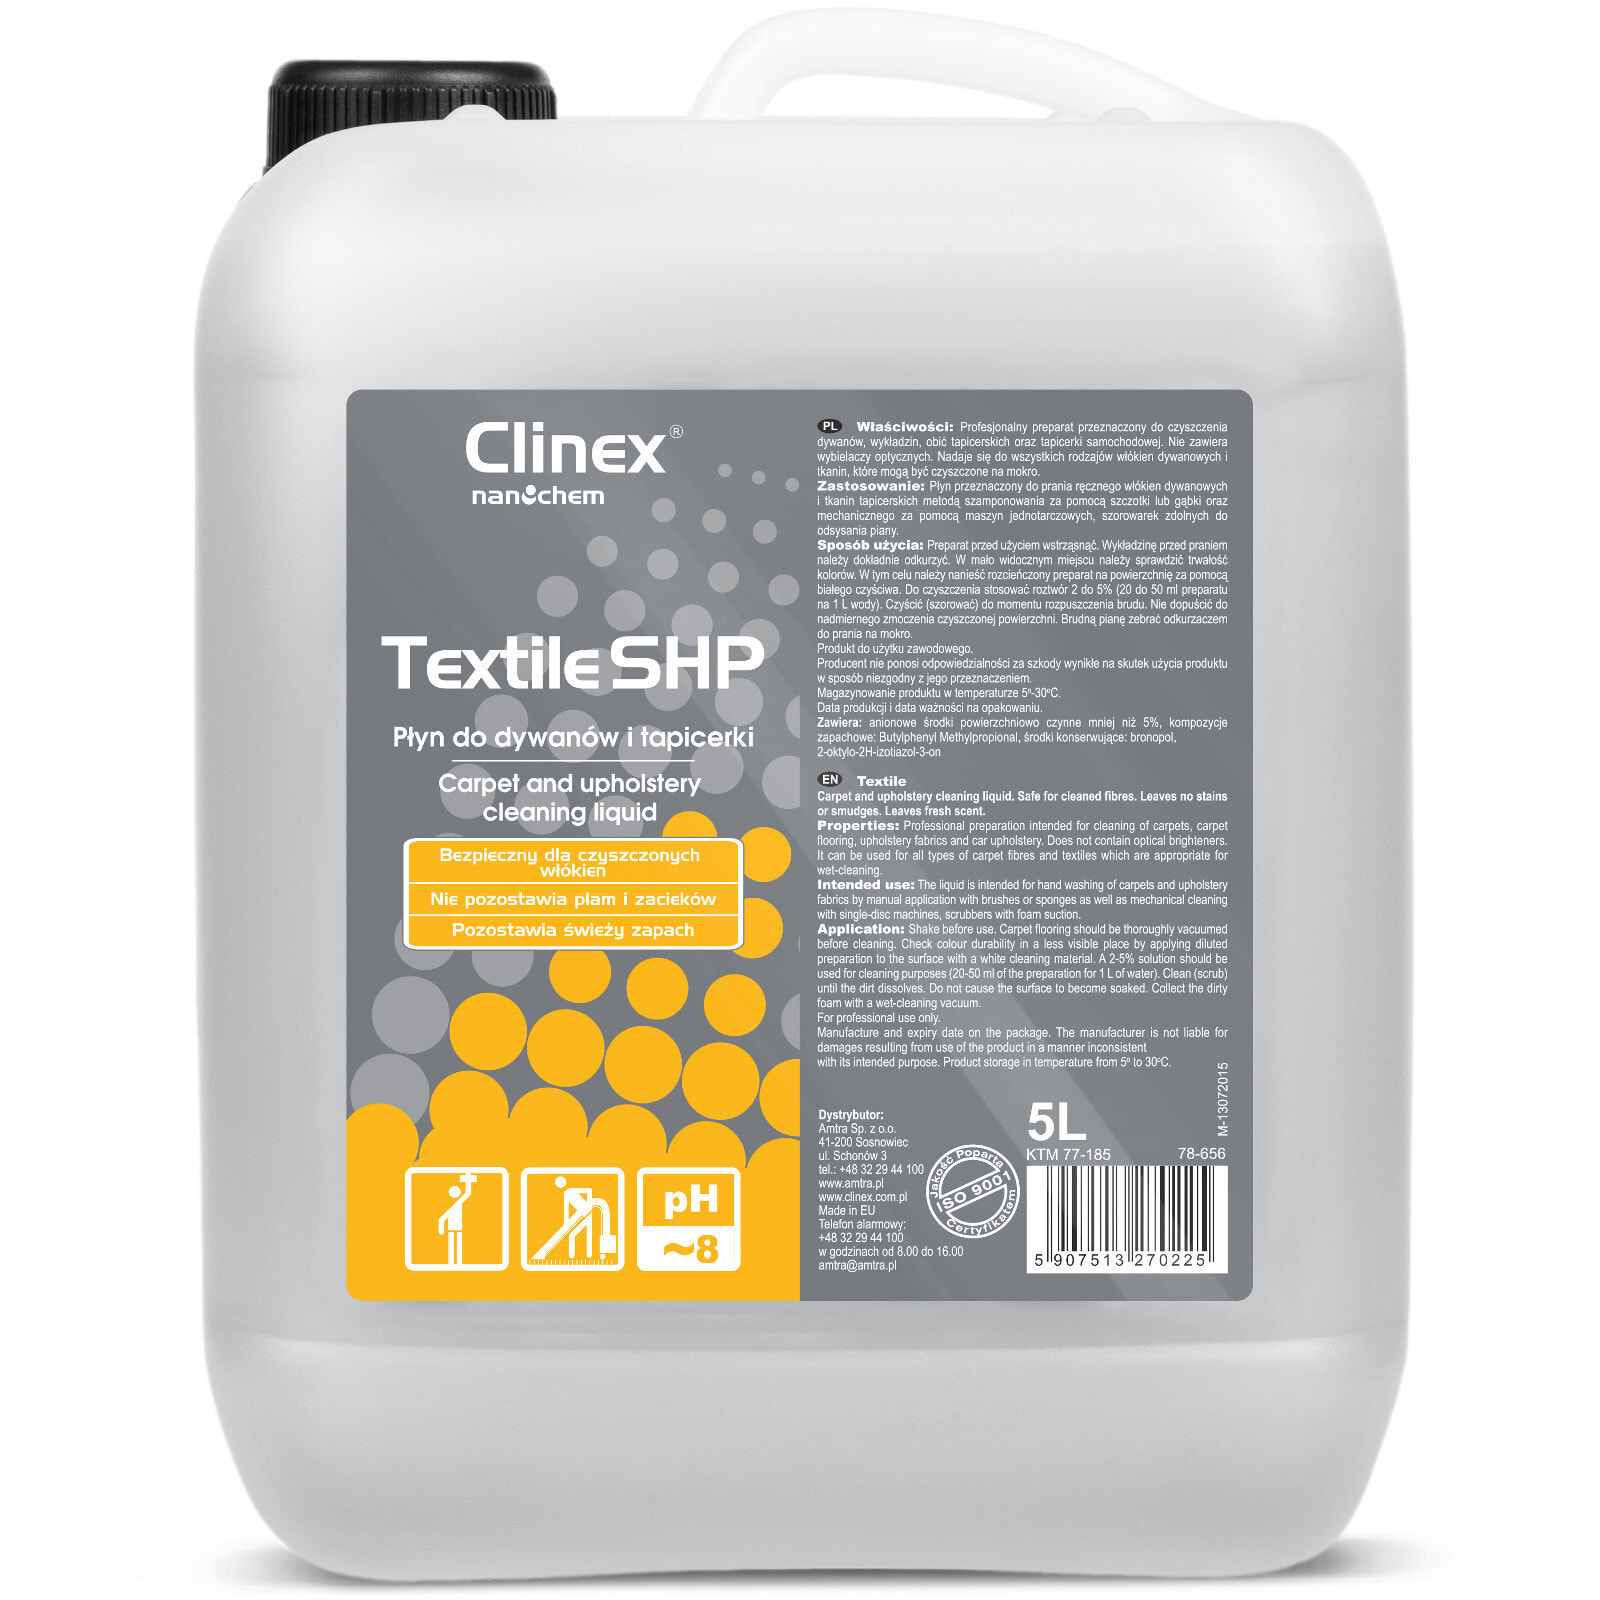 CLINEX Textile SHP 5L washing liquid for cleaning carpets, furniture and upholstery